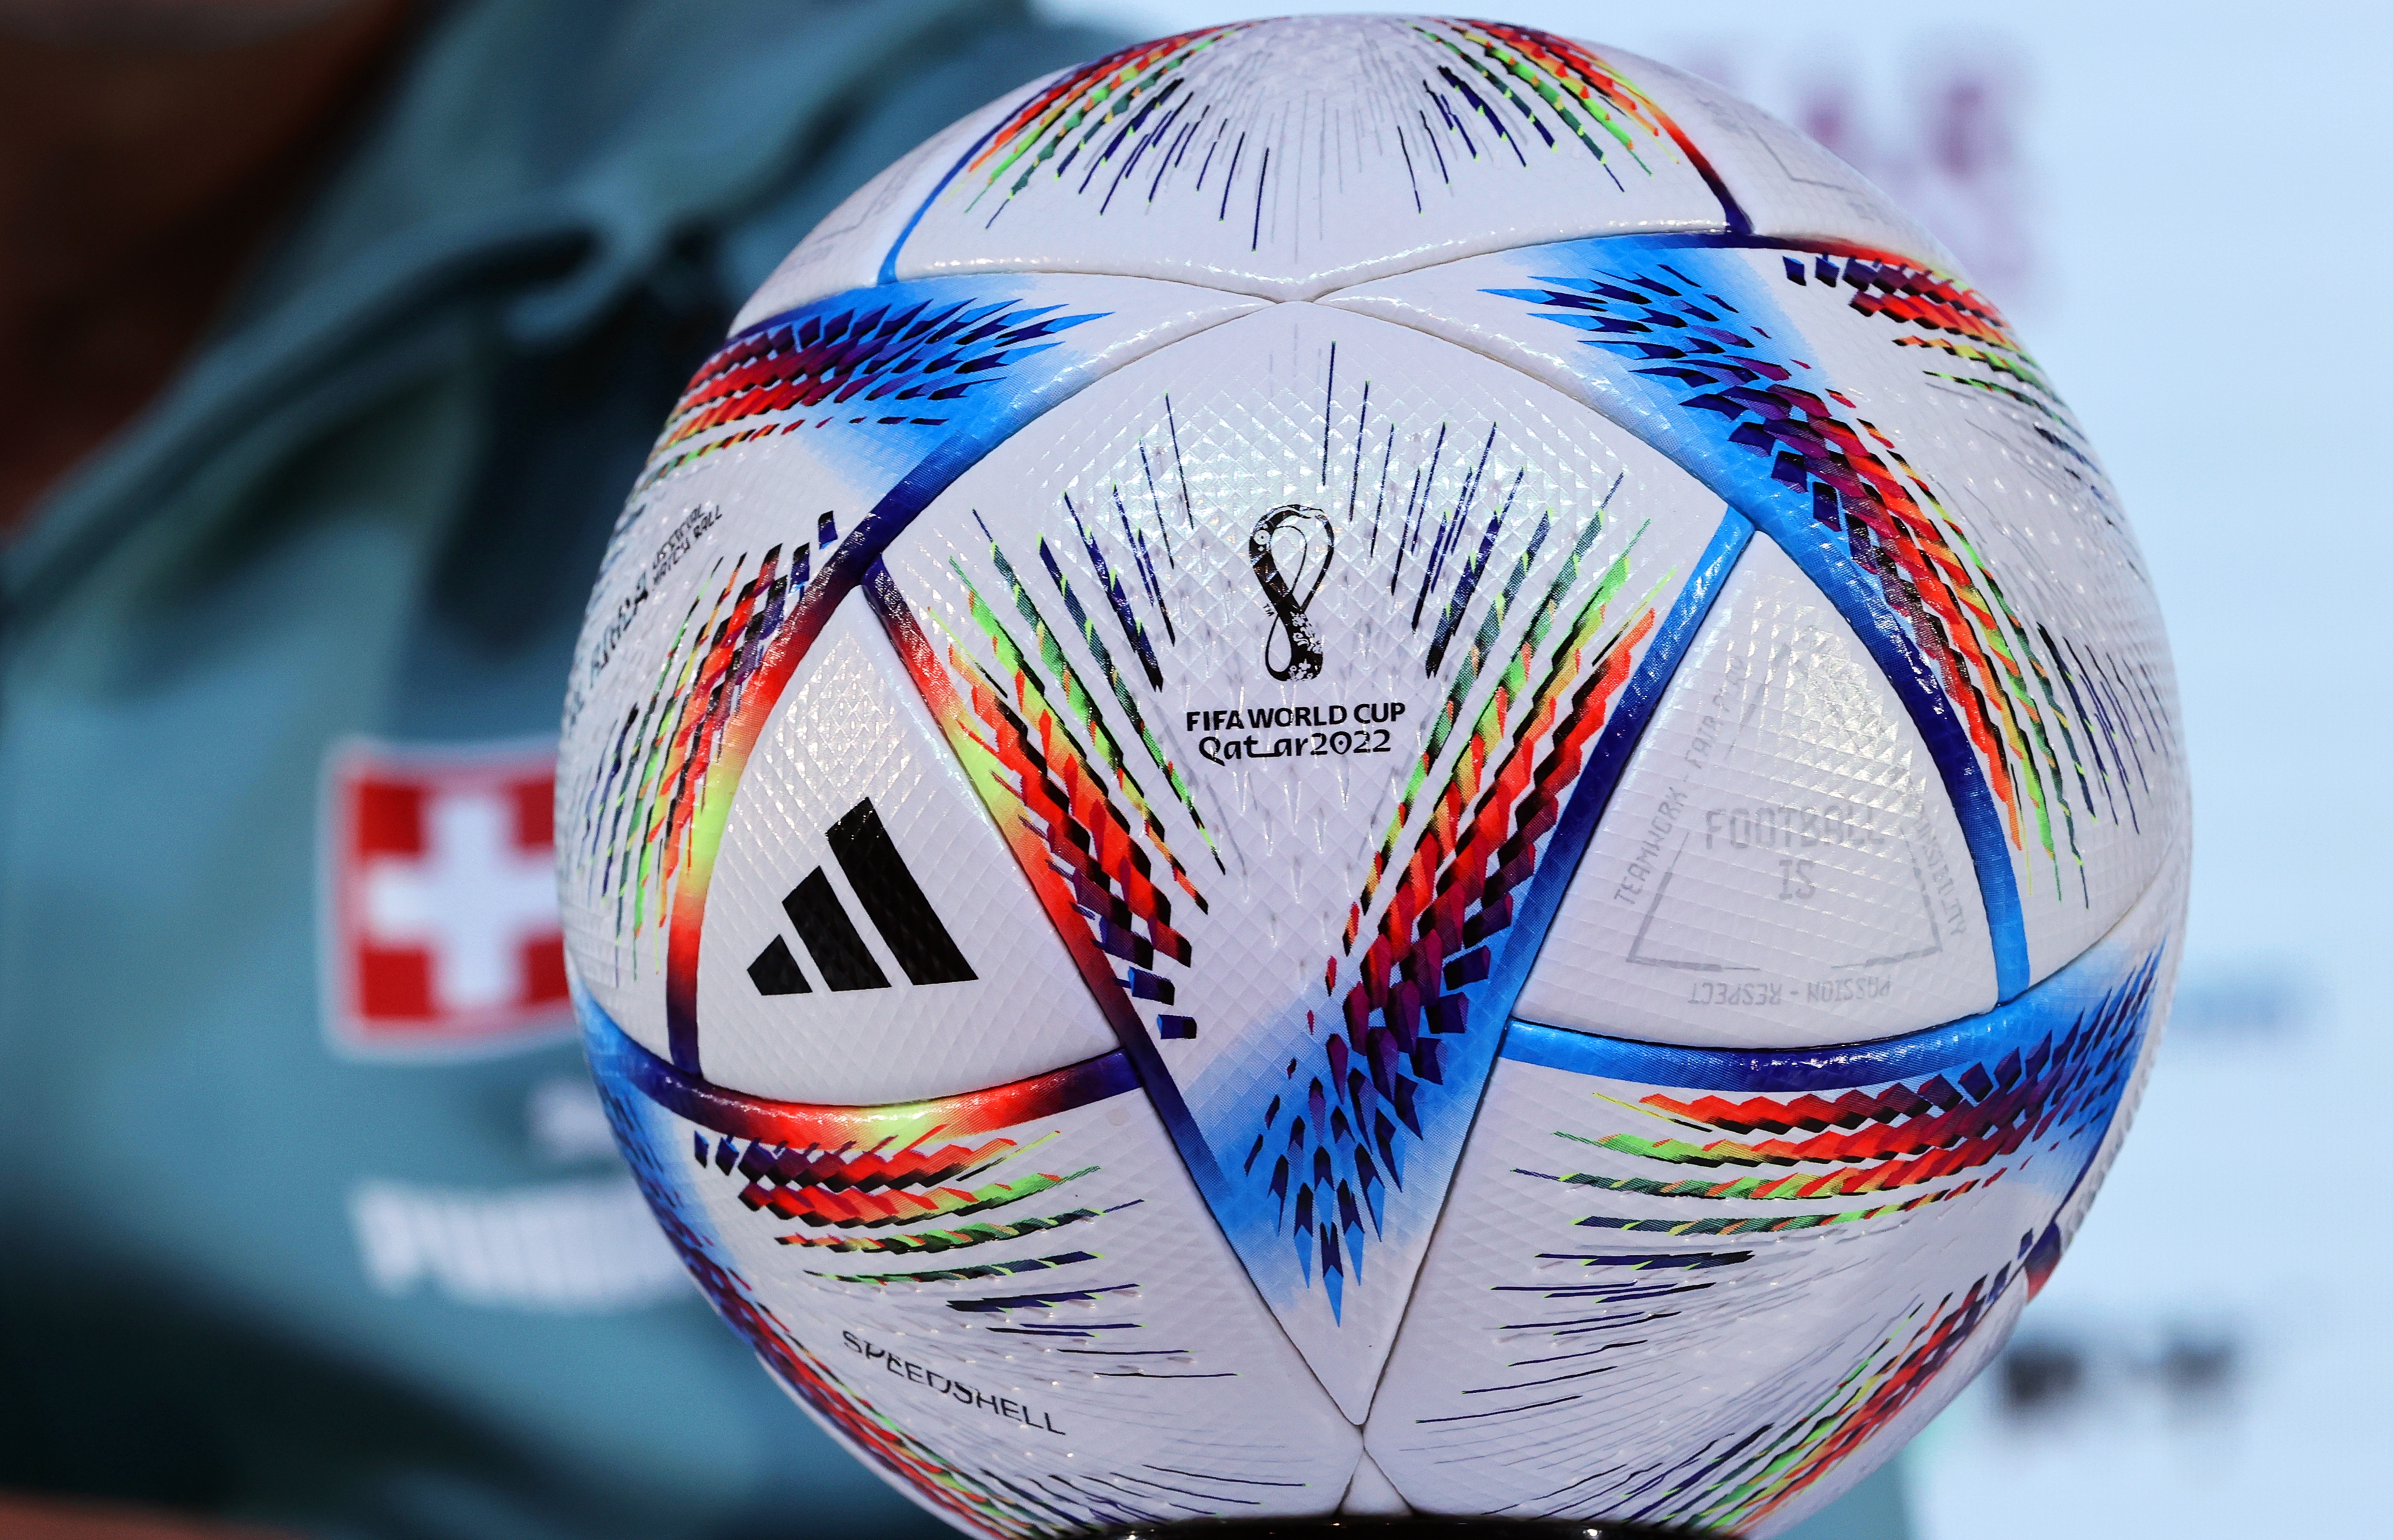 Very proud': Indonesia makes mark in Qatar with official ball